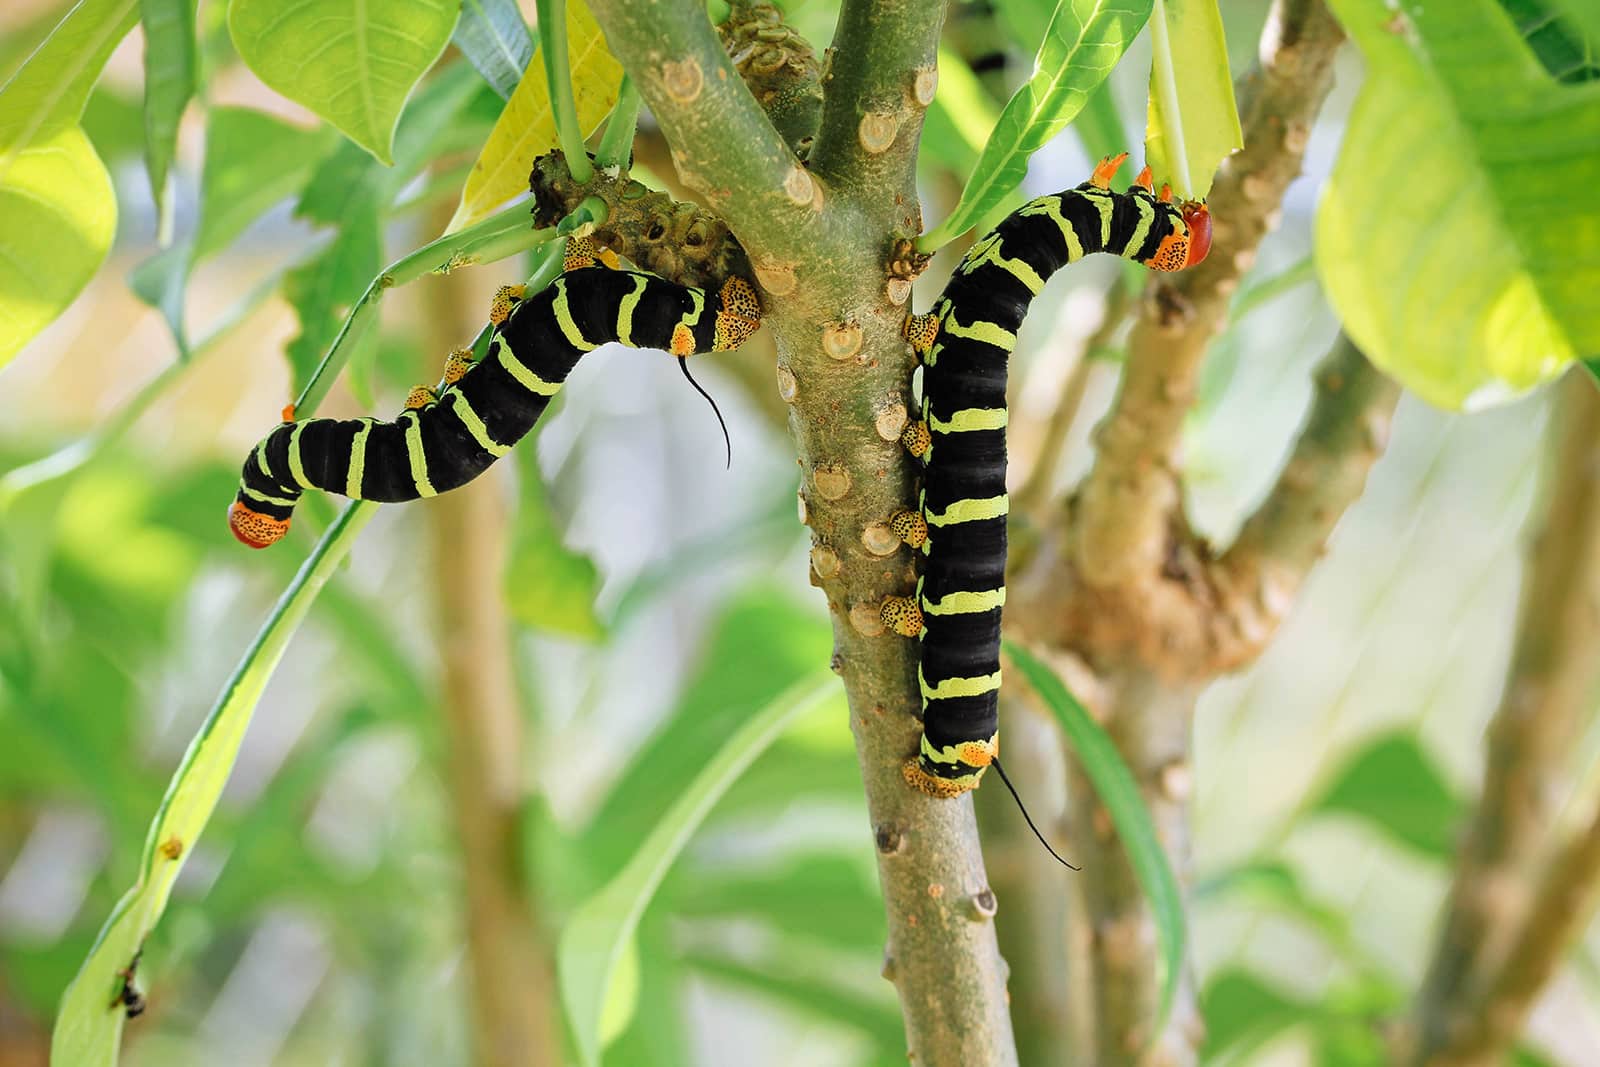 Simple visual guide: types of striped caterpillars that may be eating your plants